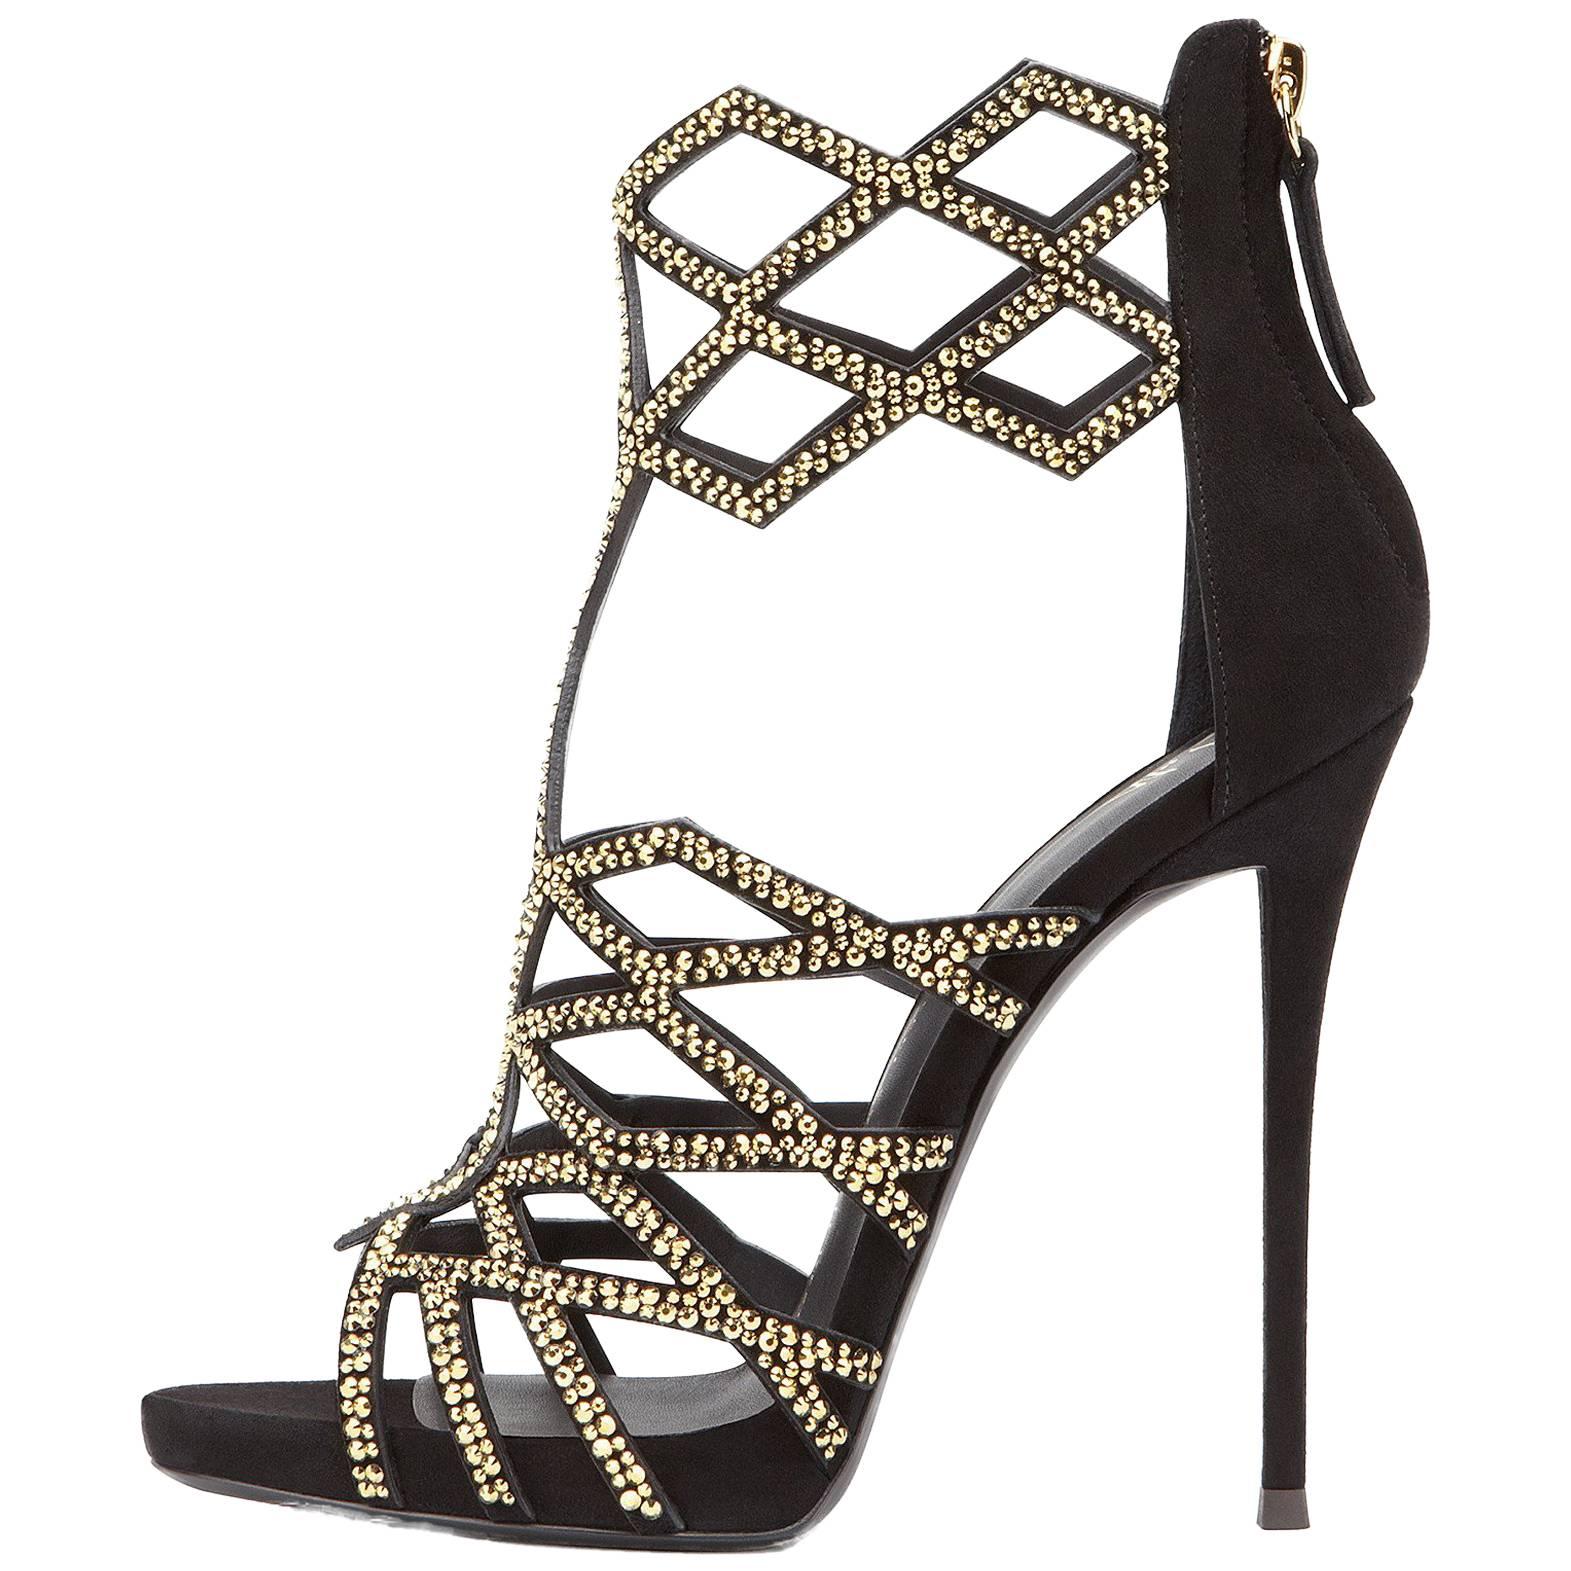 Giuseppe Zanotti New Black Suede Gold Crystal Web Evening Sandals Heels in Box